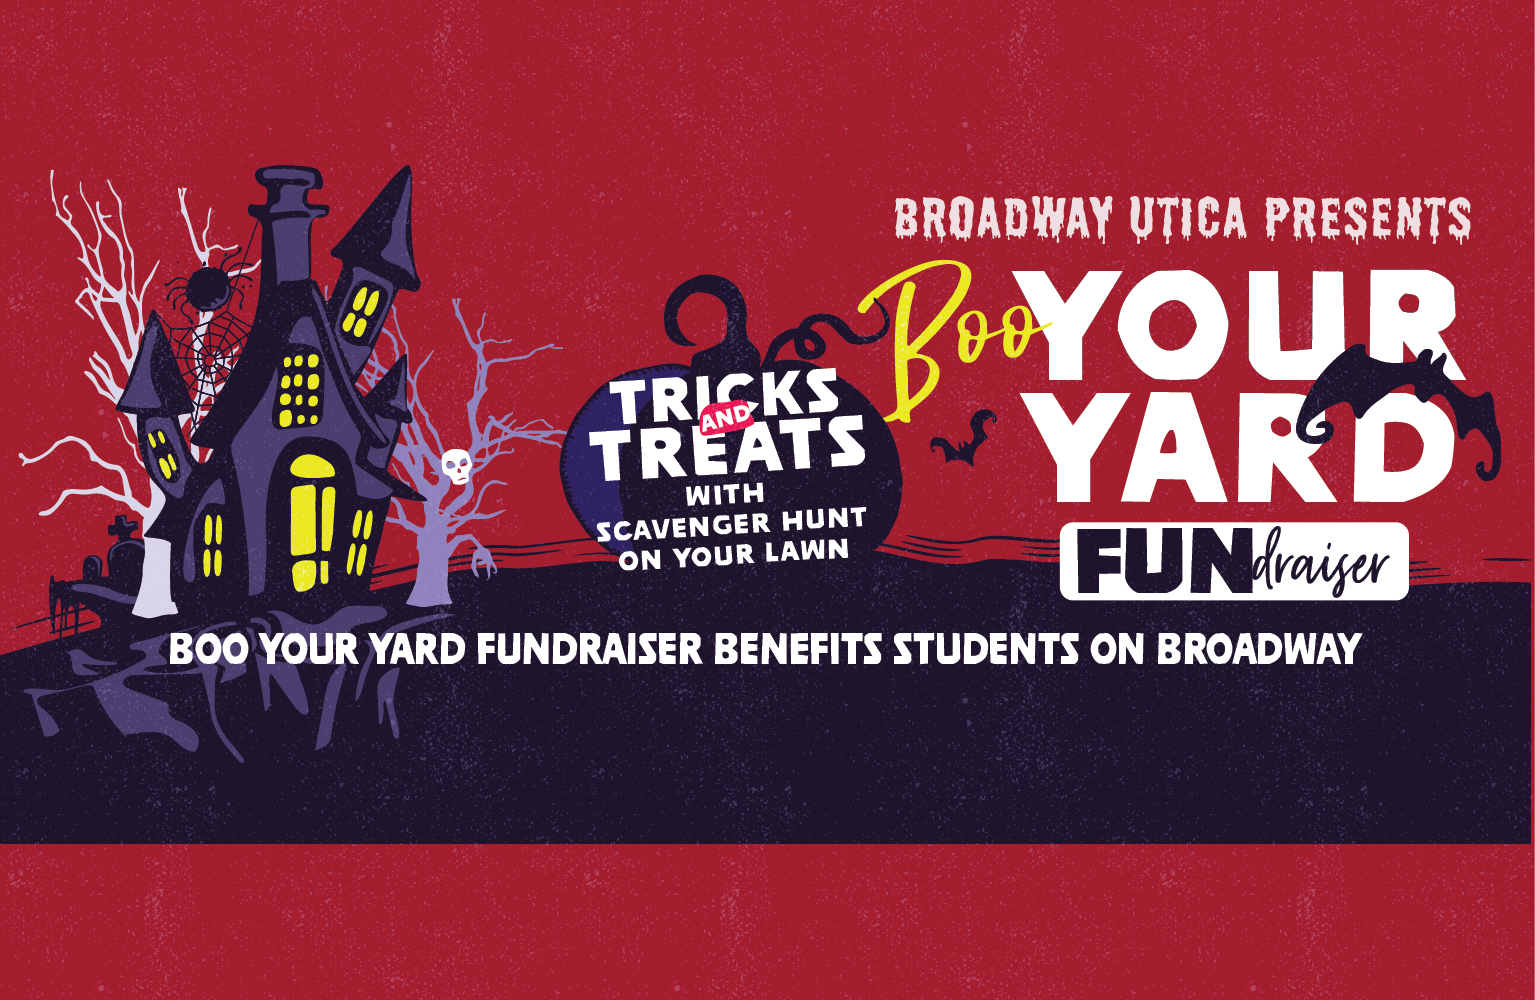 BOO YOUR YARD WITH BROADWAY UTICA